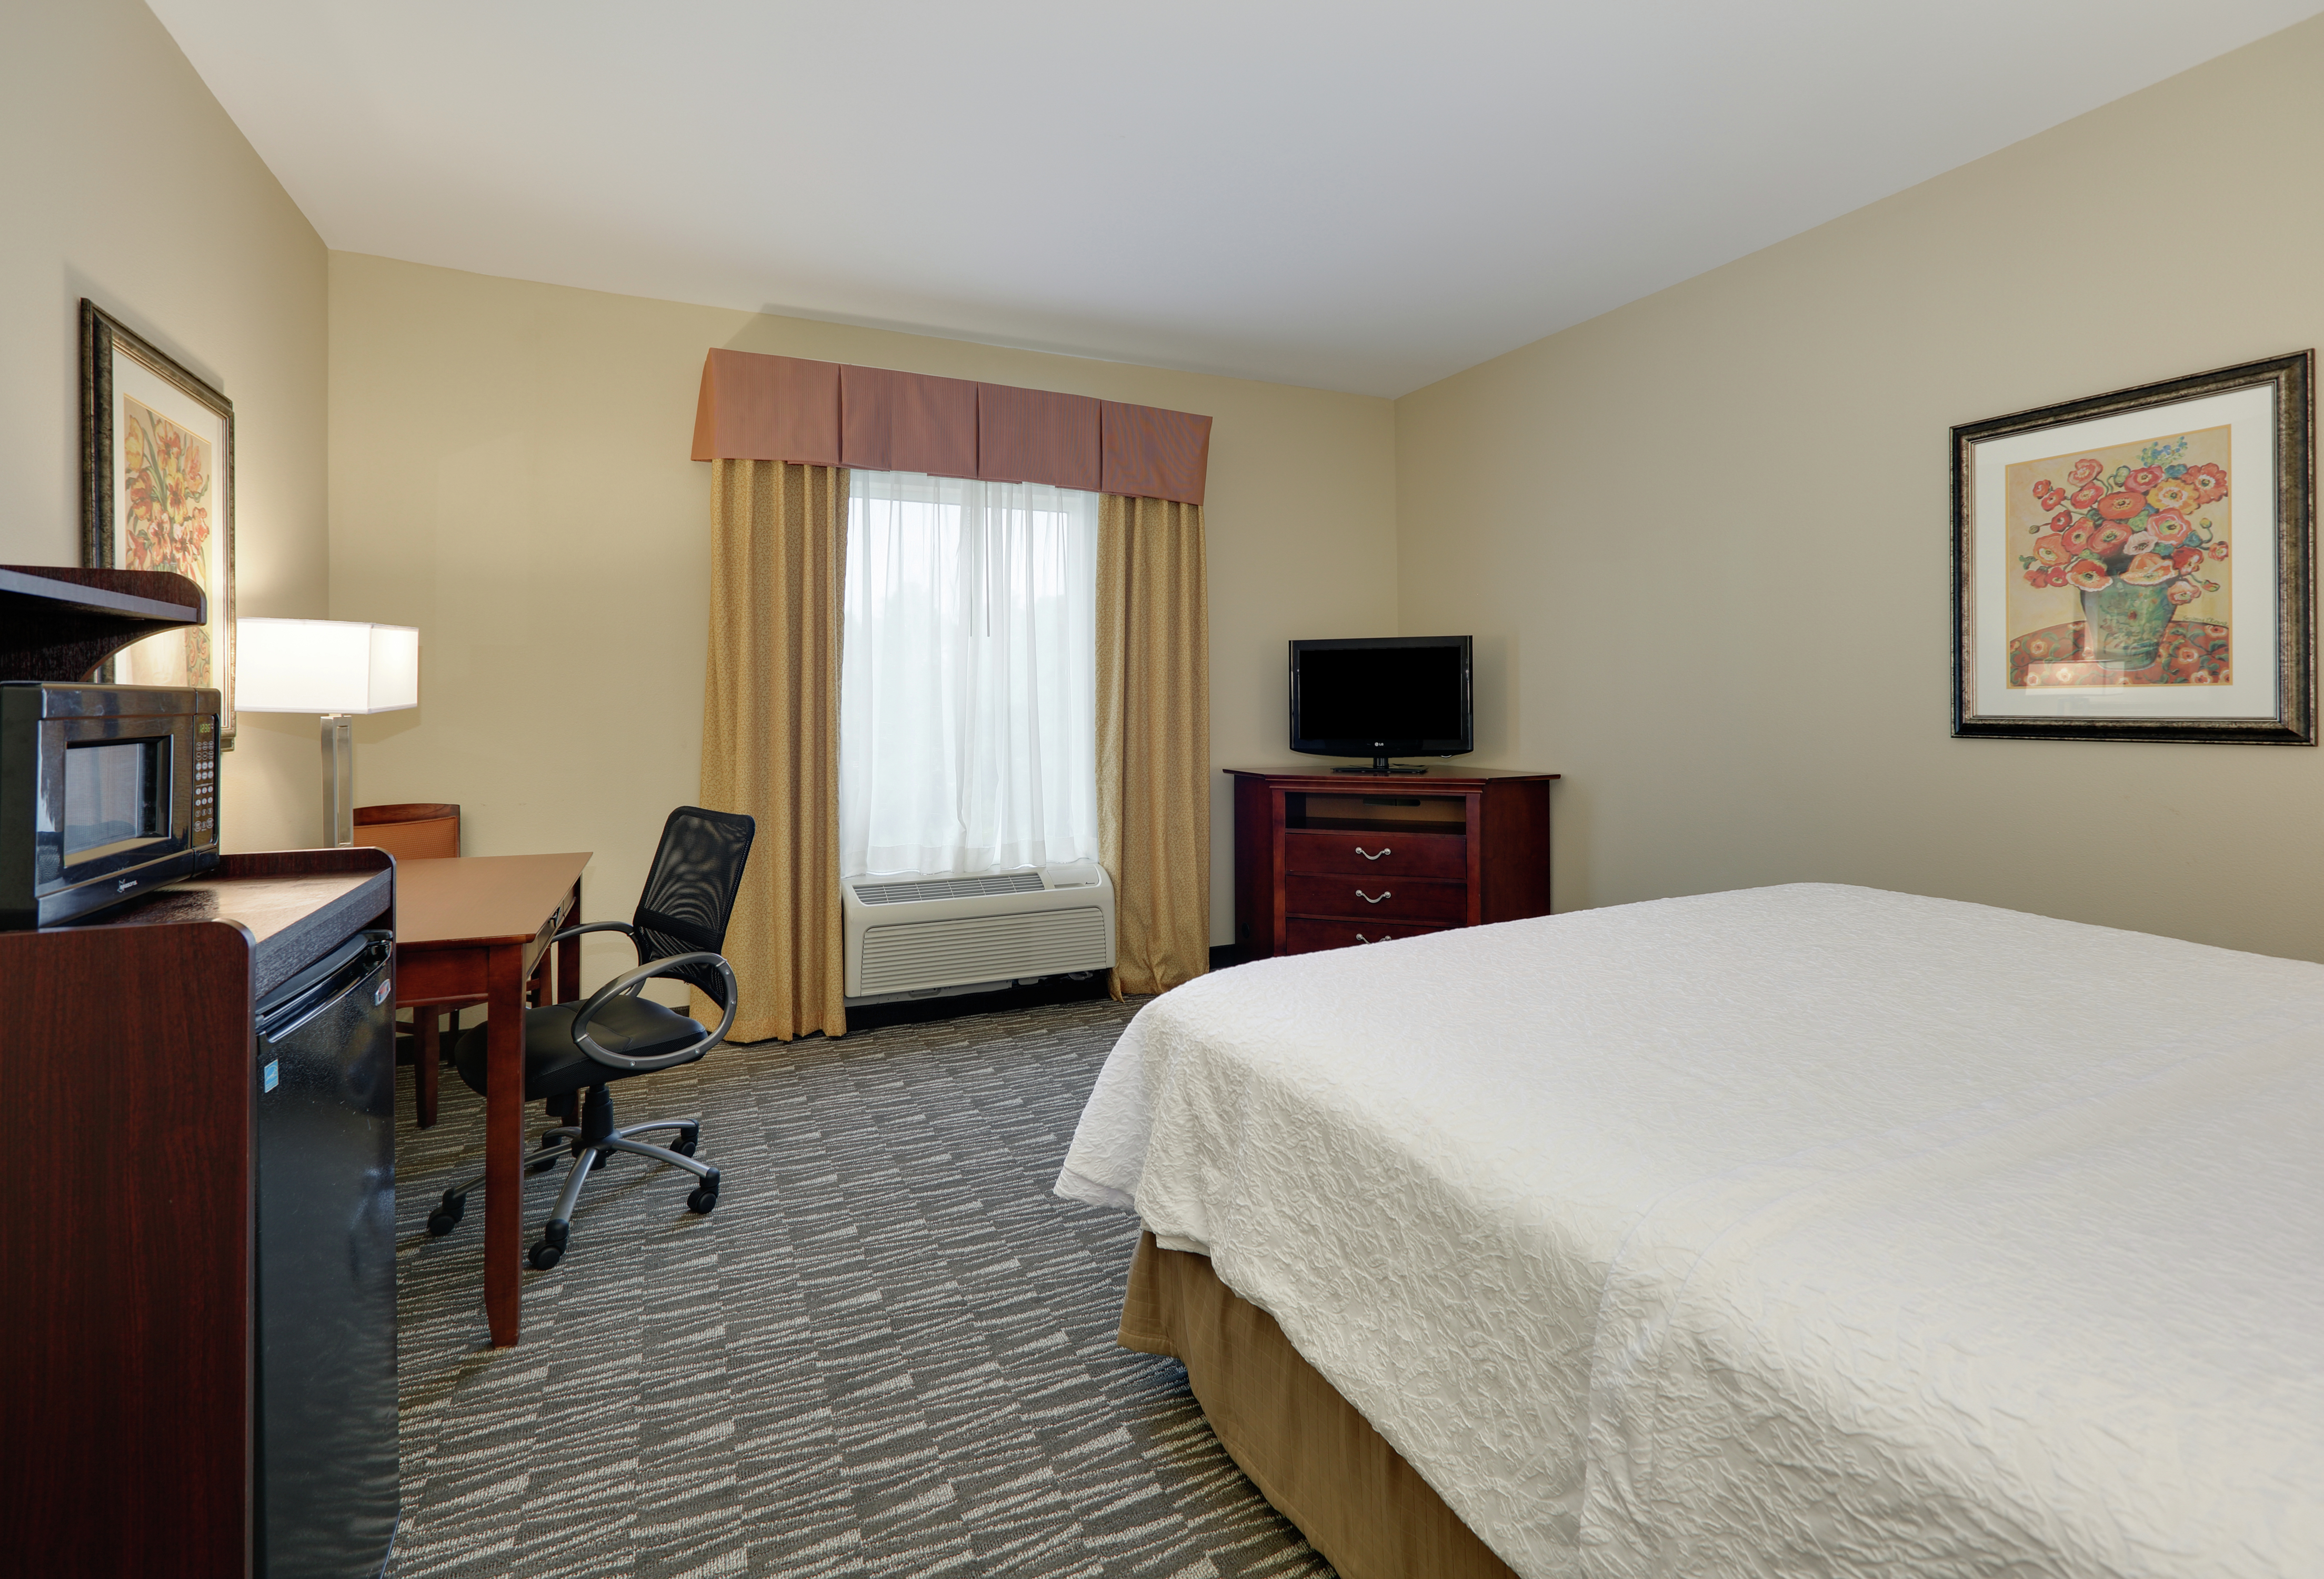 King Guestroom With Bed And Amenities